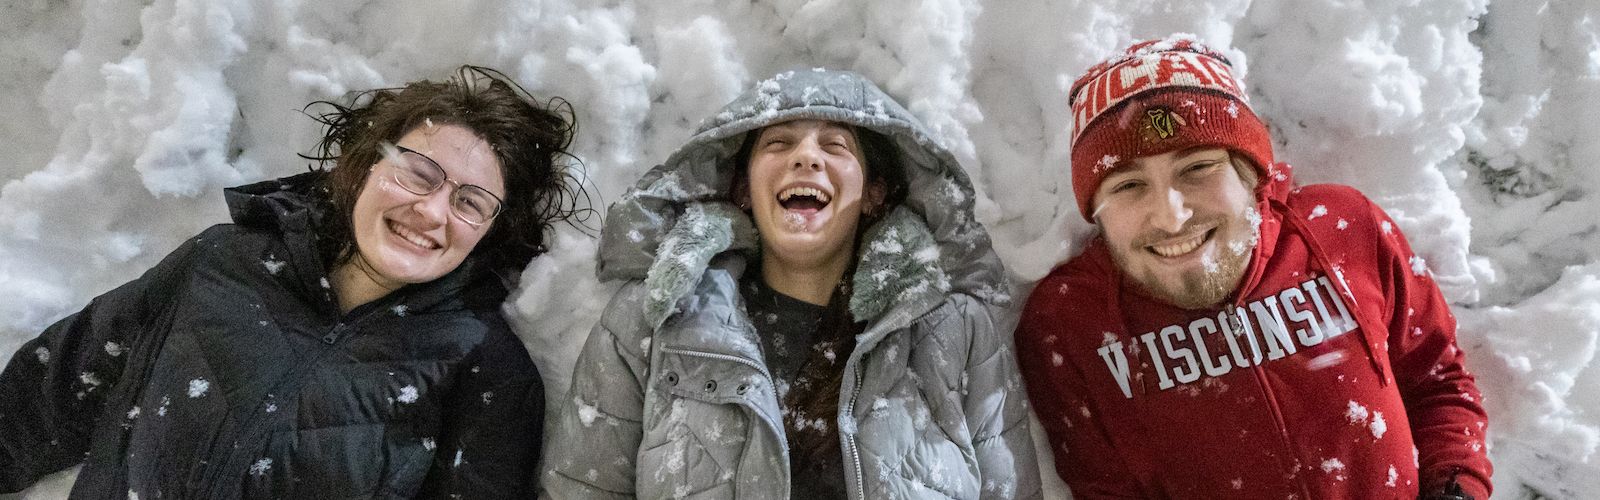 Undergraduate students Jenna Crolla (left), Liv Baumann (center), and Nick Mugnai (right) lie in the snow on Bascom Hill during a winter night snowfall at the University of Wisconsin–Madison on Dec. 15, 2022. (Photo by Taylor Wolfram / UW–Madison)